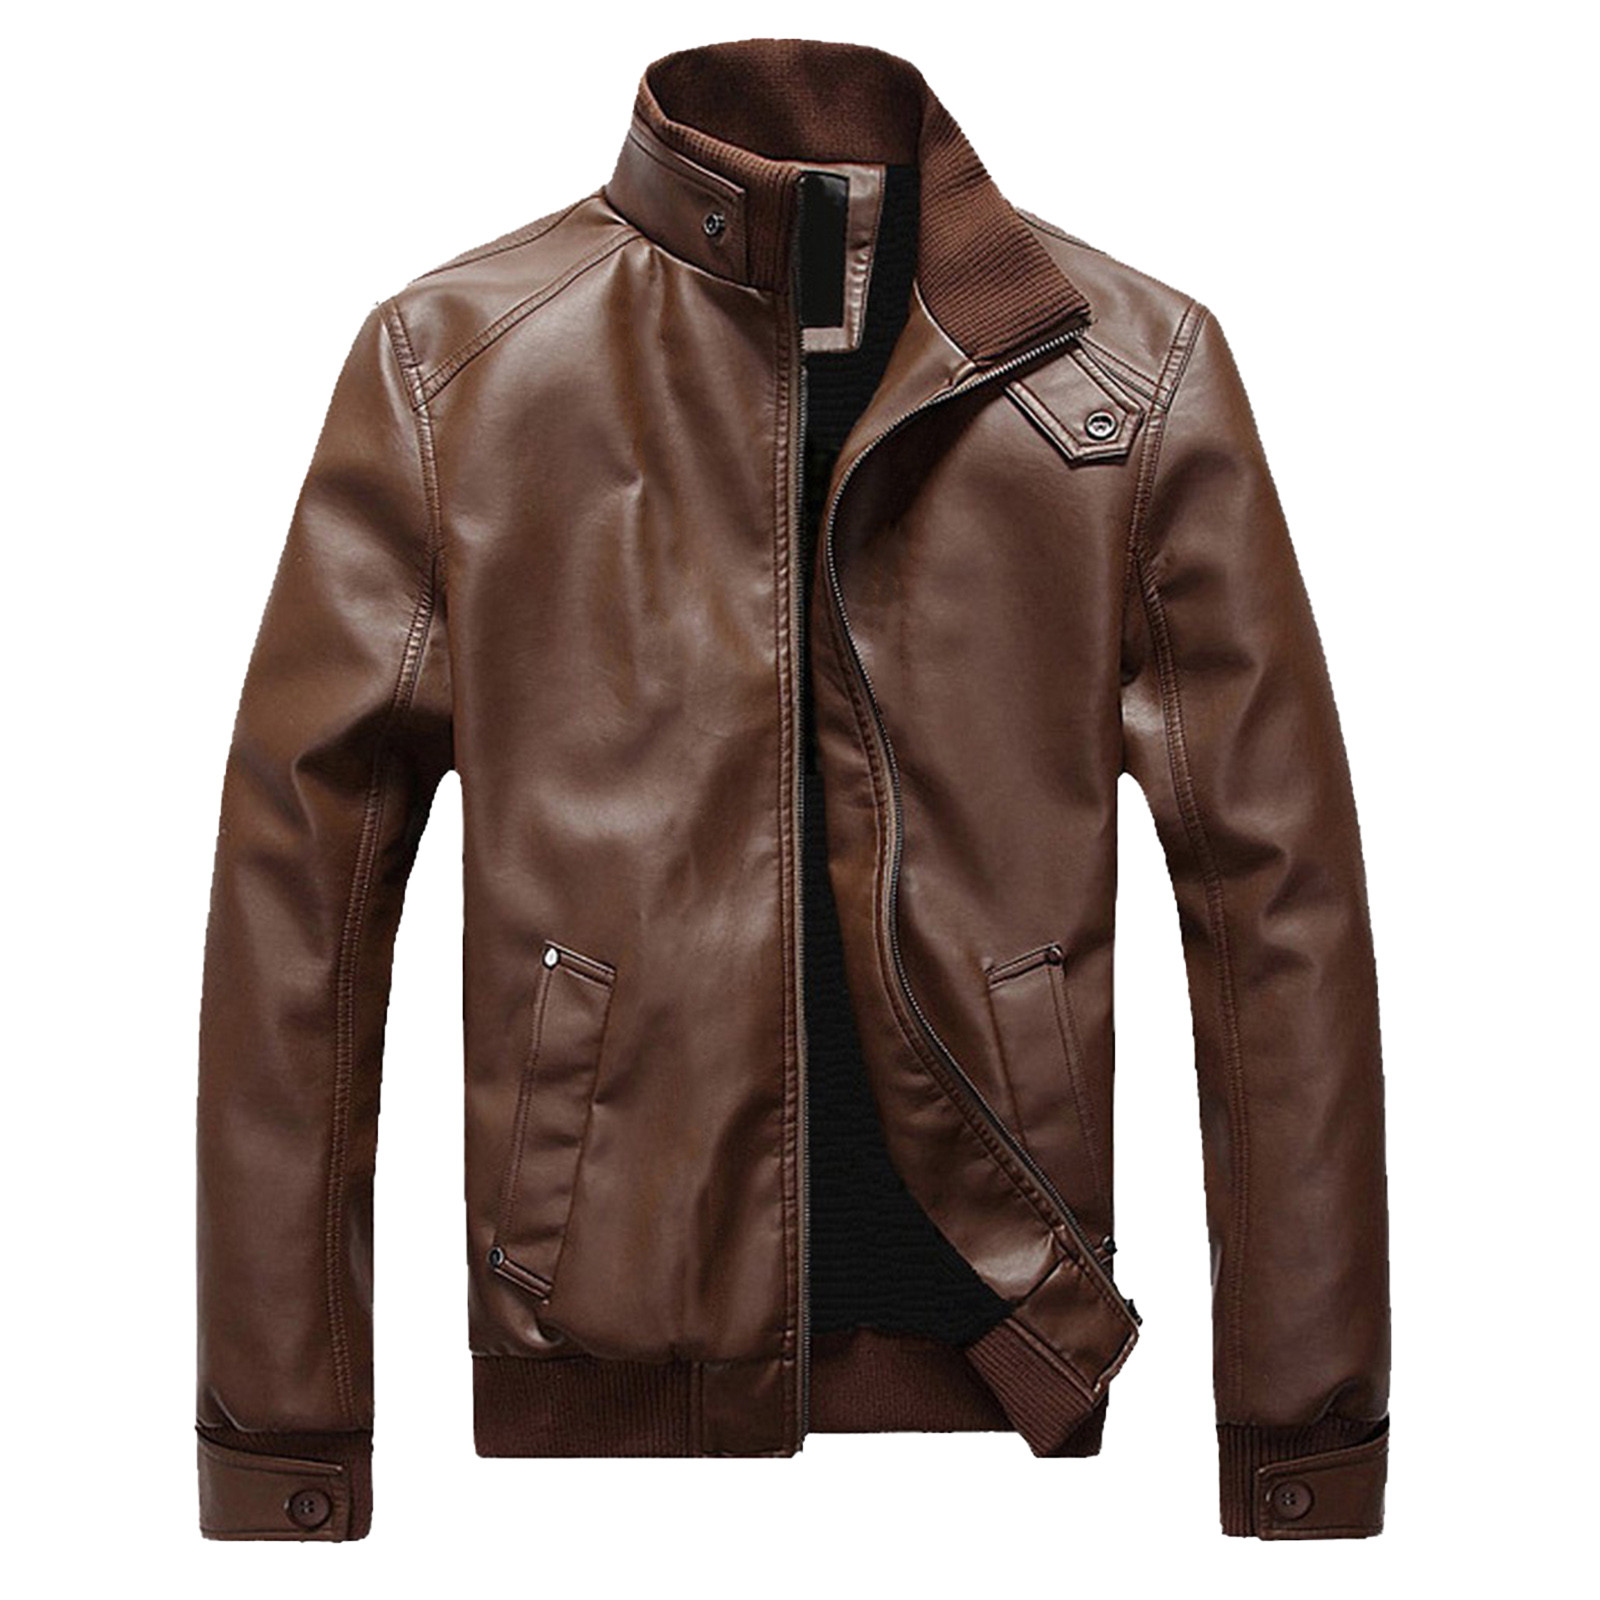 solacol Jackets for Men Mens Jackets Winter Mens Jacket Winter Mens Winter Leather Jacket Biker Motorcycle Zipper Long Sleeve Coat Top Blouses Mens Winter Coats Leather Jacket Men Motorcycle - image 2 of 5